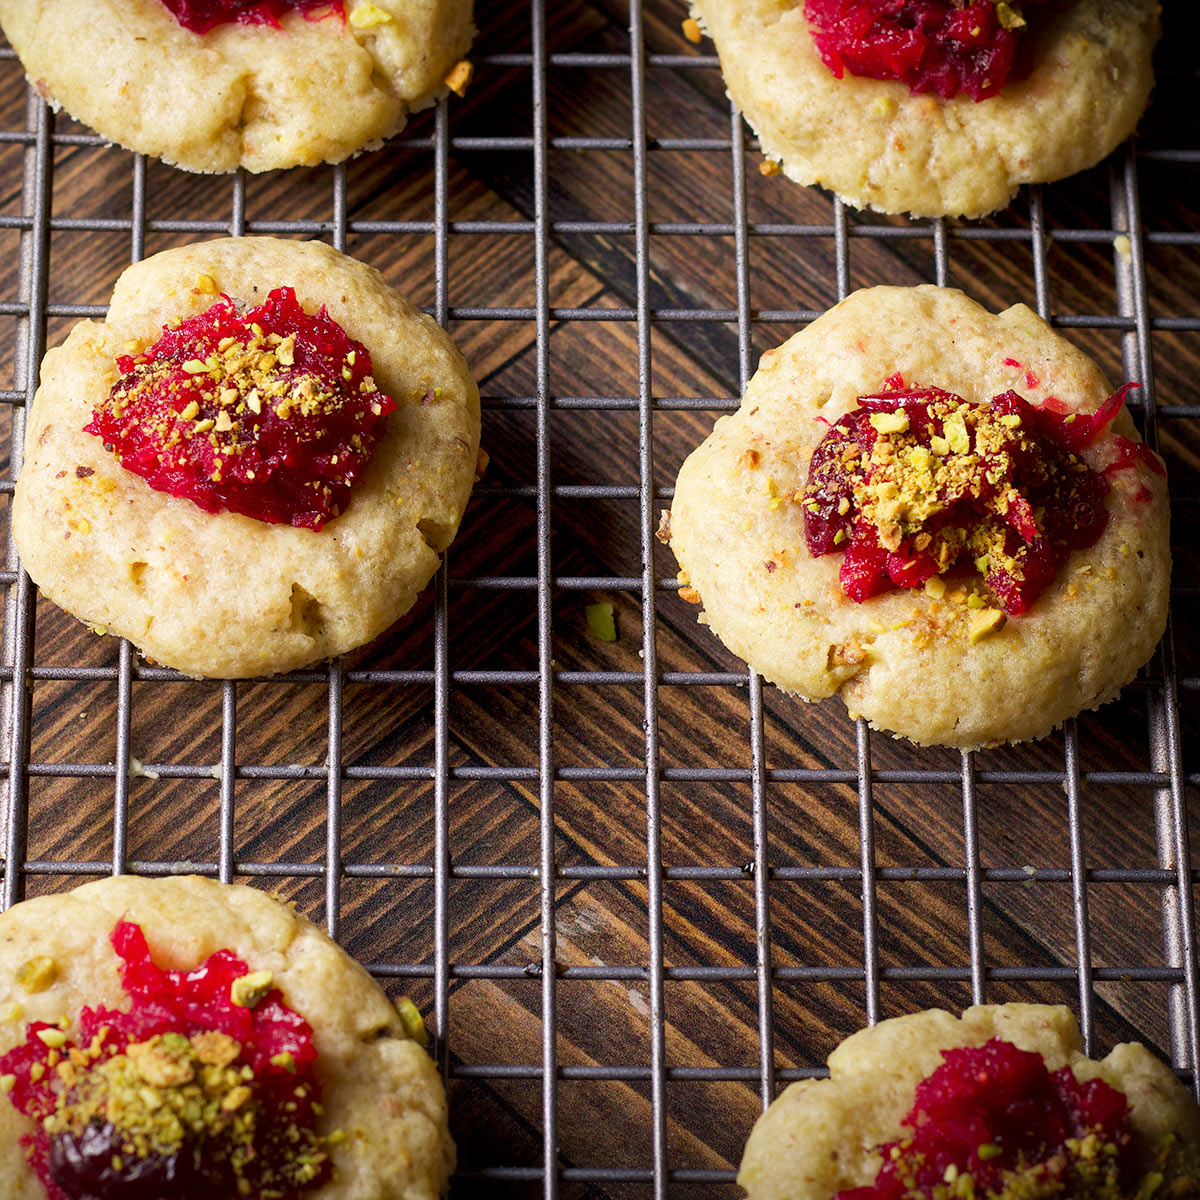 Cranberry pistachio cookies cooling on a wire baking rack.